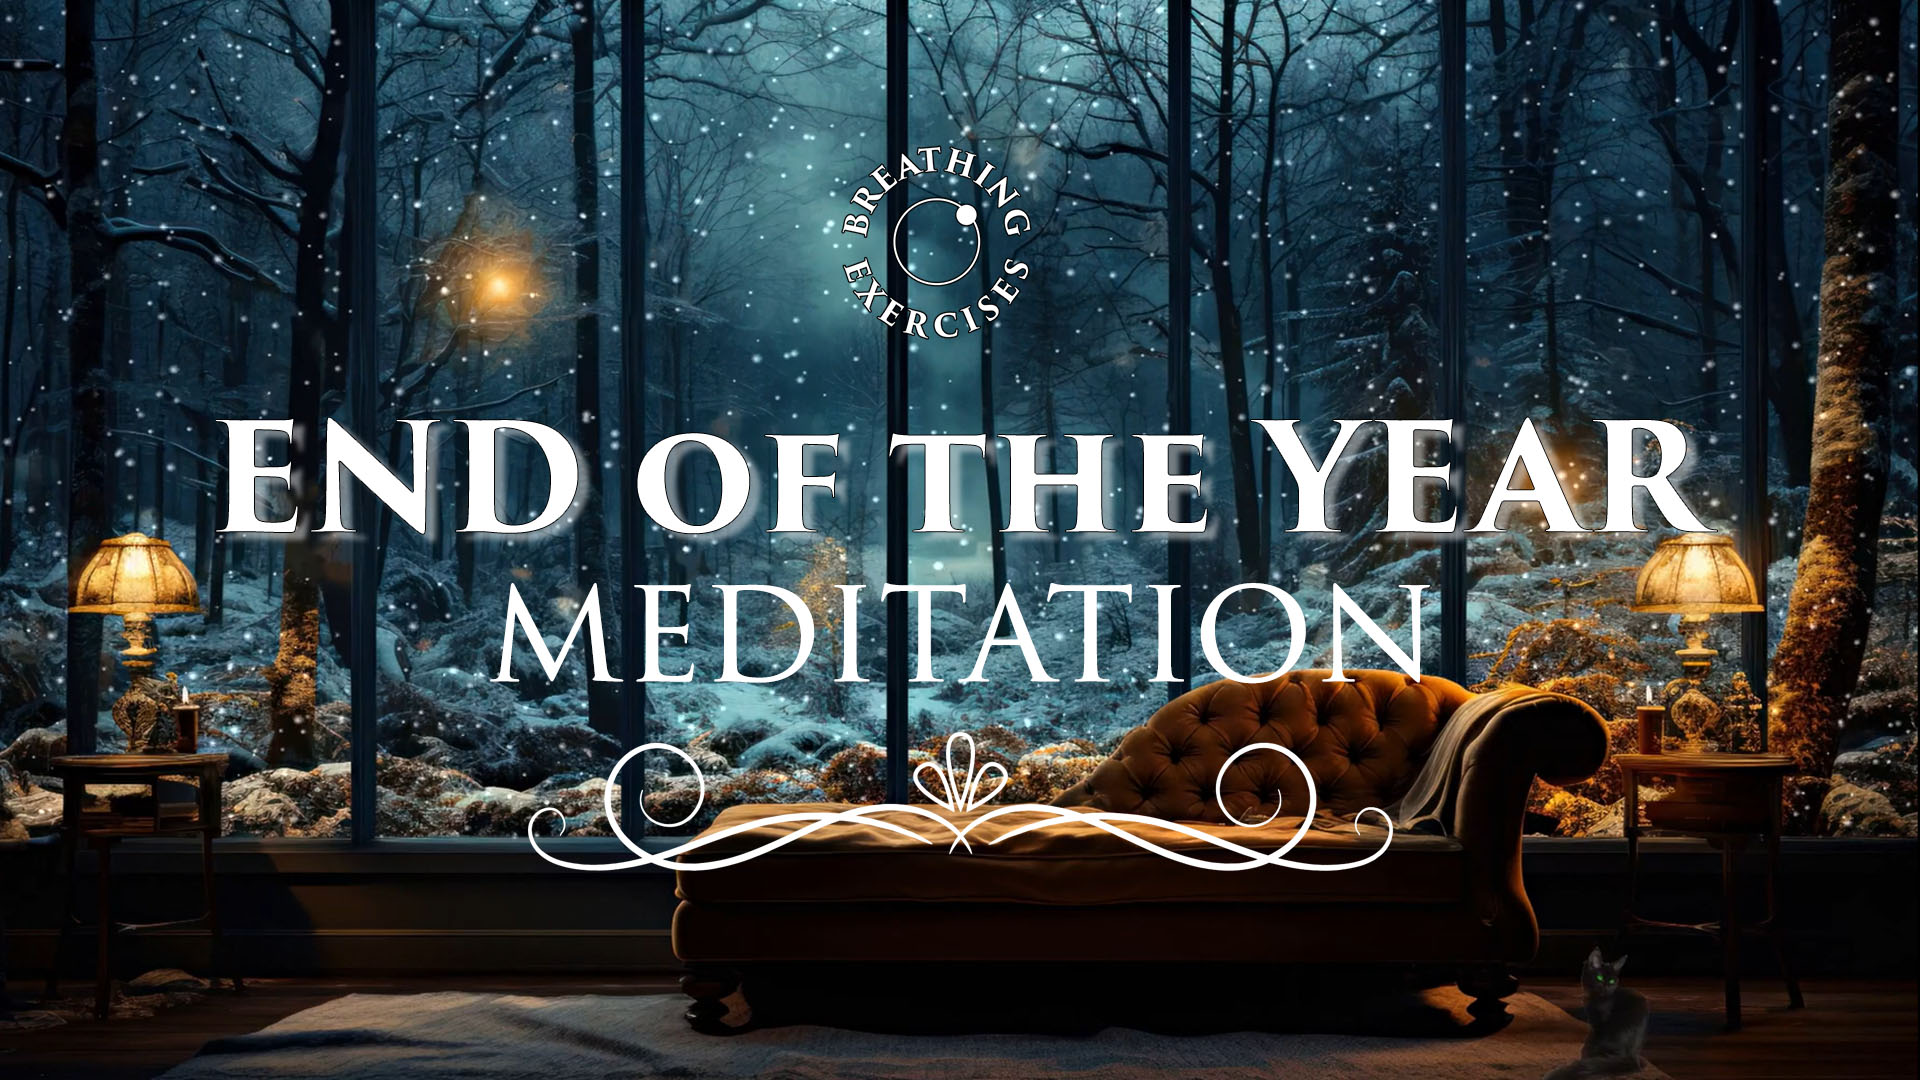 End of the year meditation